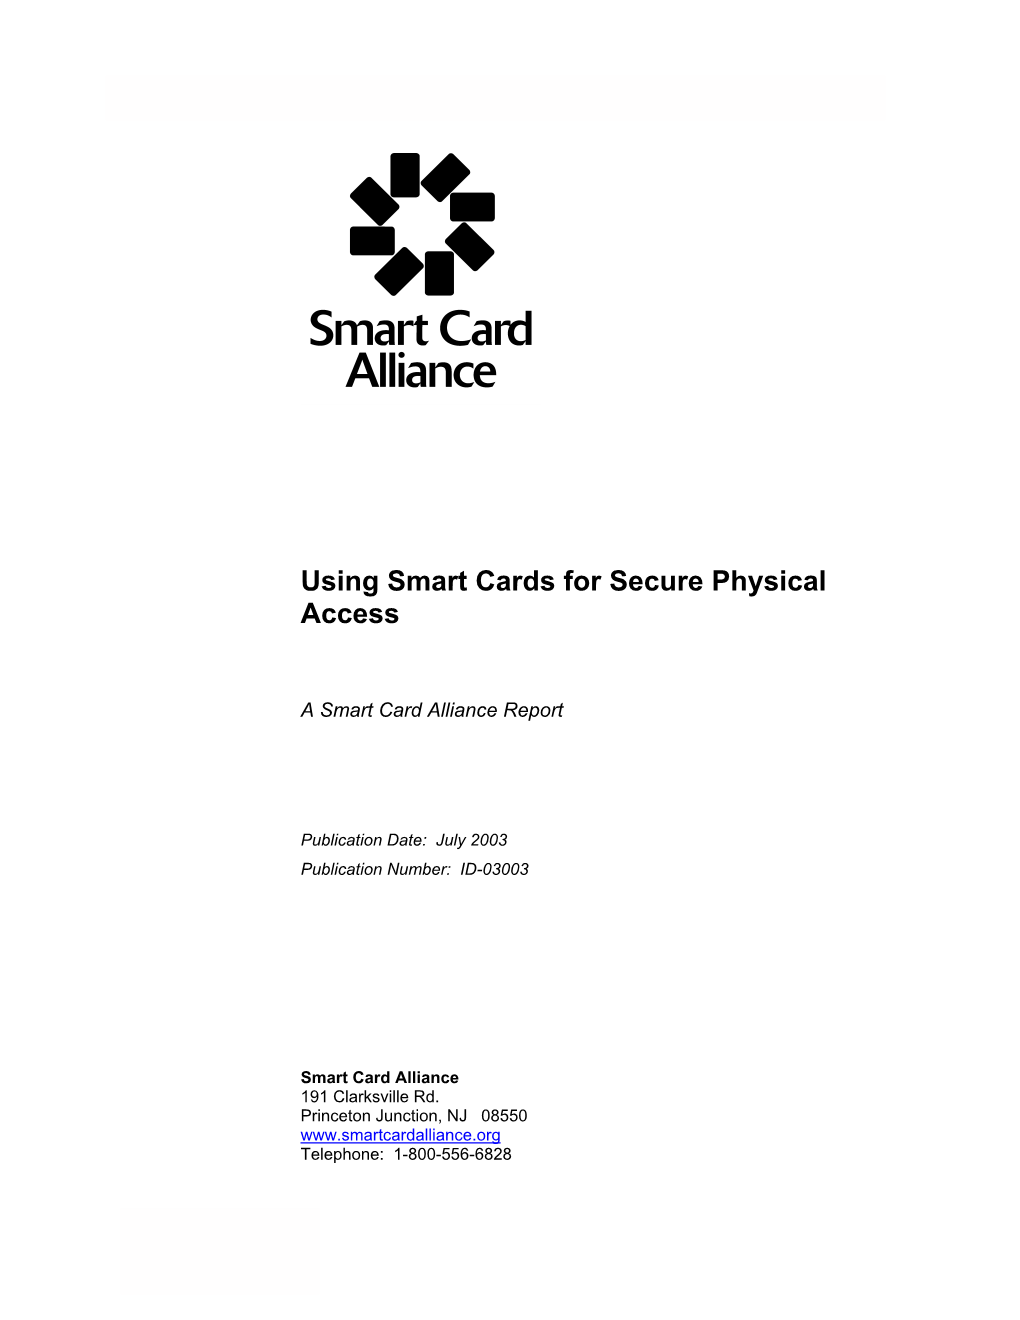 Using Smart Cards for Secure Physical Access